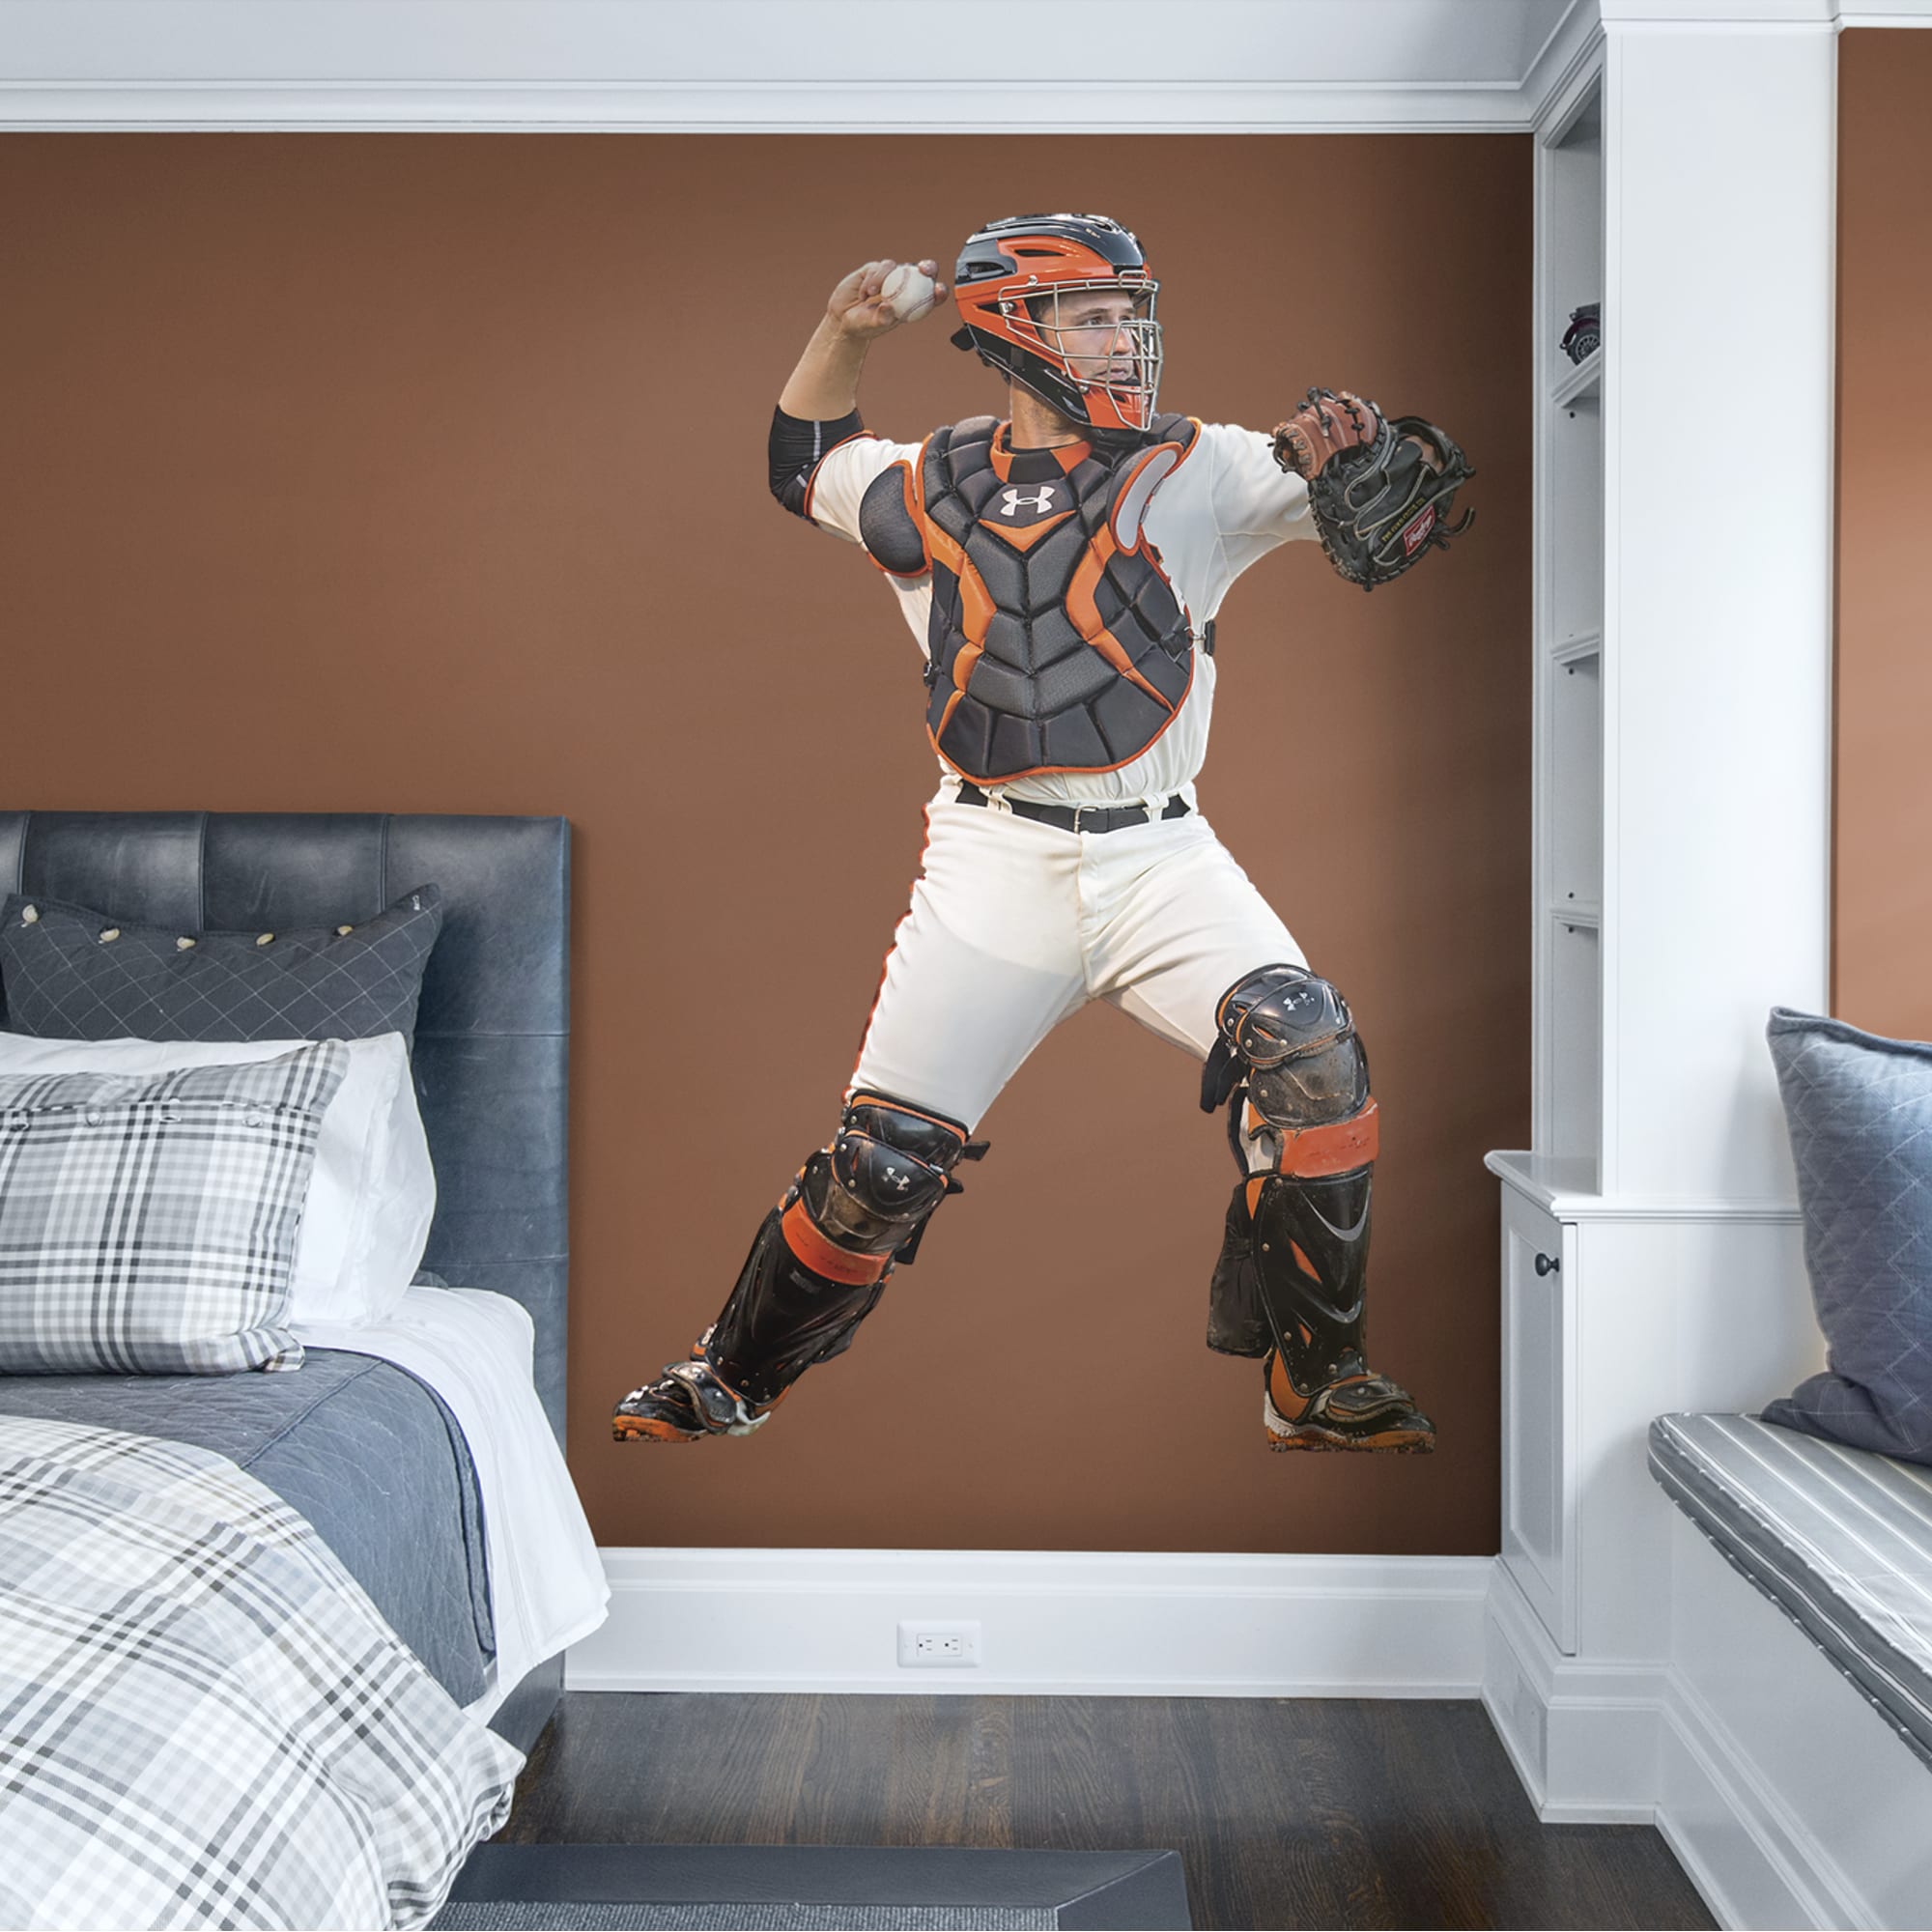 Buster Posey for San Francisco Giants: Catcher - Officially Licensed MLB Removable Wall Decal Life-Size Athlete + 10 Decals (49"